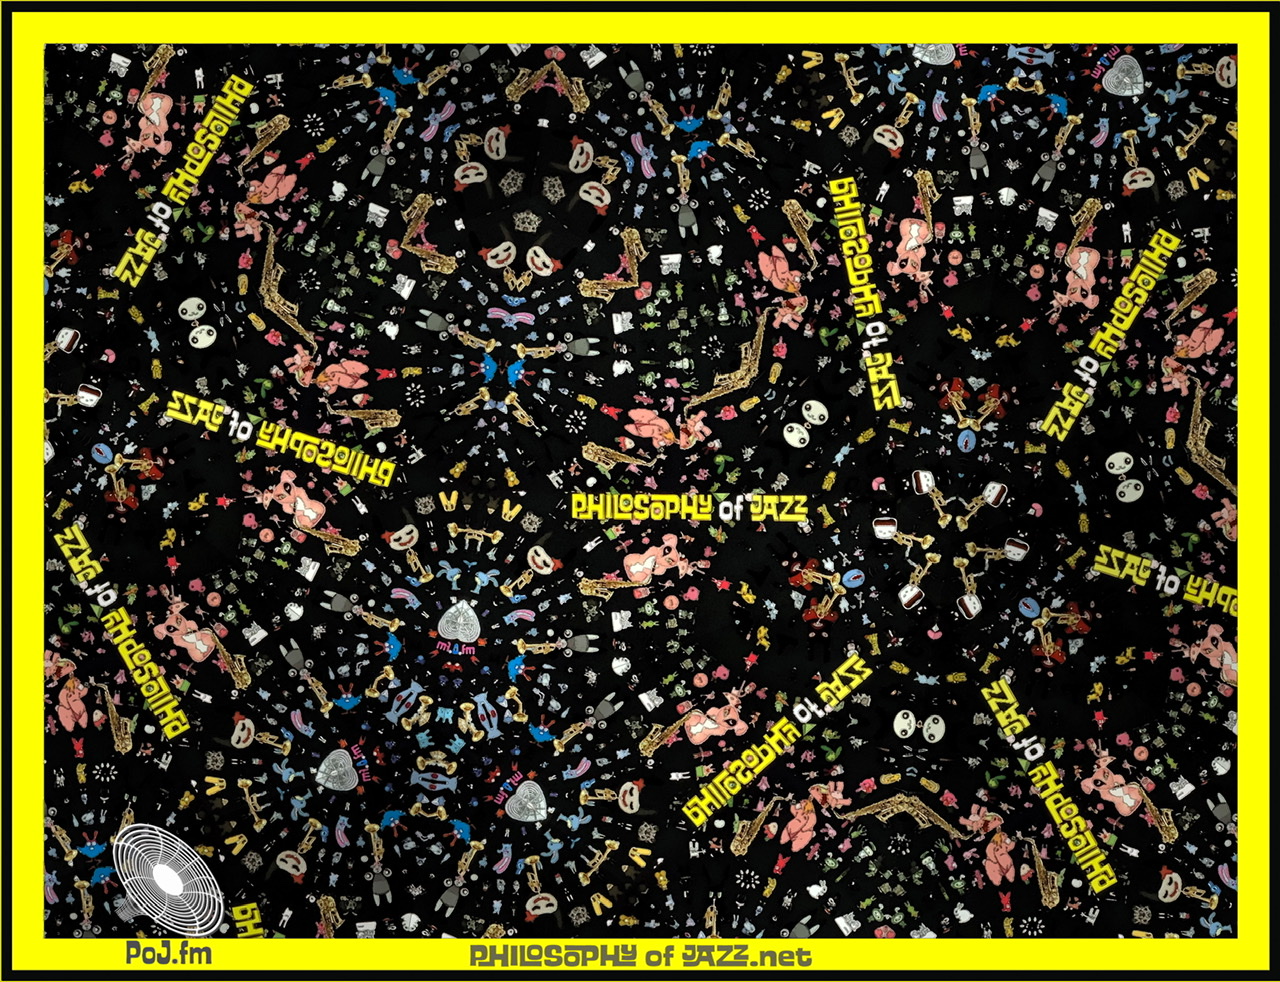 A bright yellowish slight green frame with the words "Philosophy of Jazz.net" centered in bottom of the frame and inside of the frame is a black background with hundreds of tiny cartoon-like figures with some playing trumpets or saxophones with the same color as the frame the words "Philosophy of Jazz" in star pattern around clusters of these tiny figures.